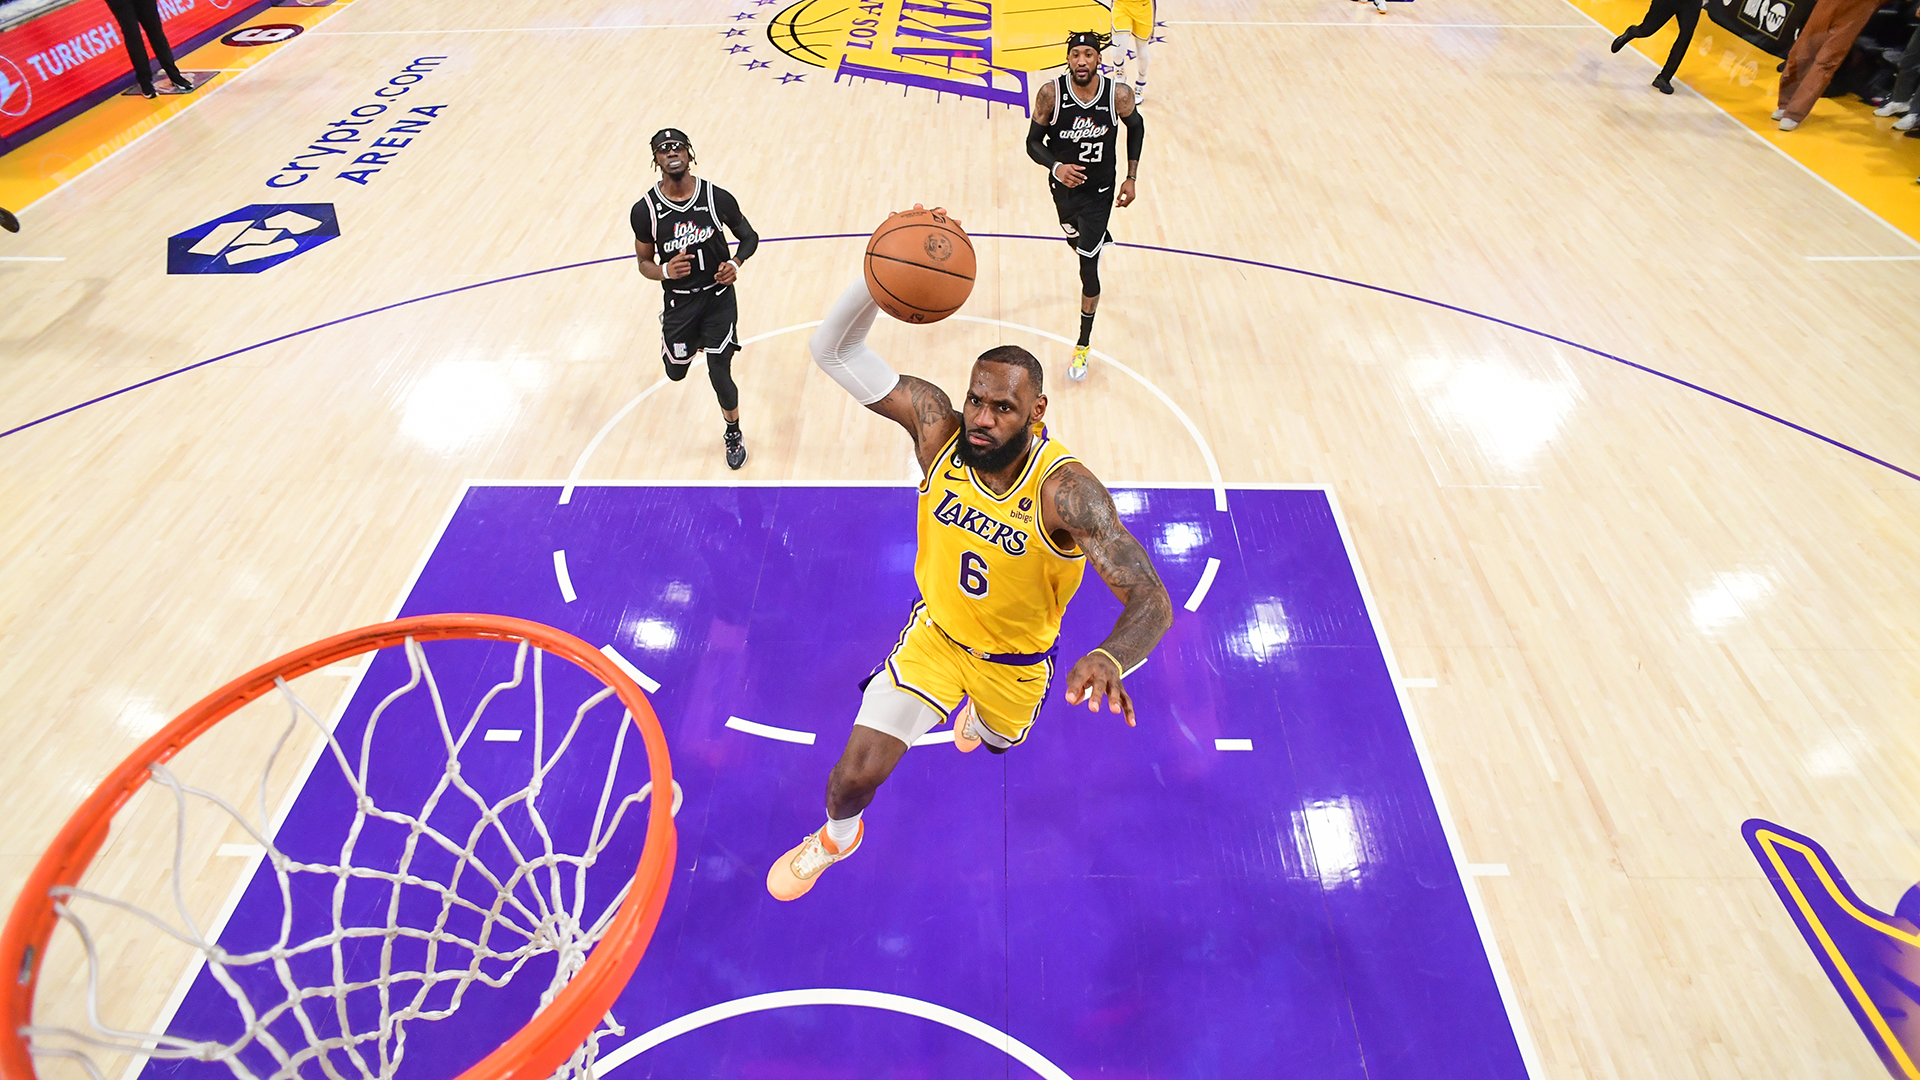 LeBron James #6 of the Los Angeles Lakers drives to the basket during the game against the LA Clippers on January 24, 2023 at Crypto.Com Arena in Los Angeles, California.